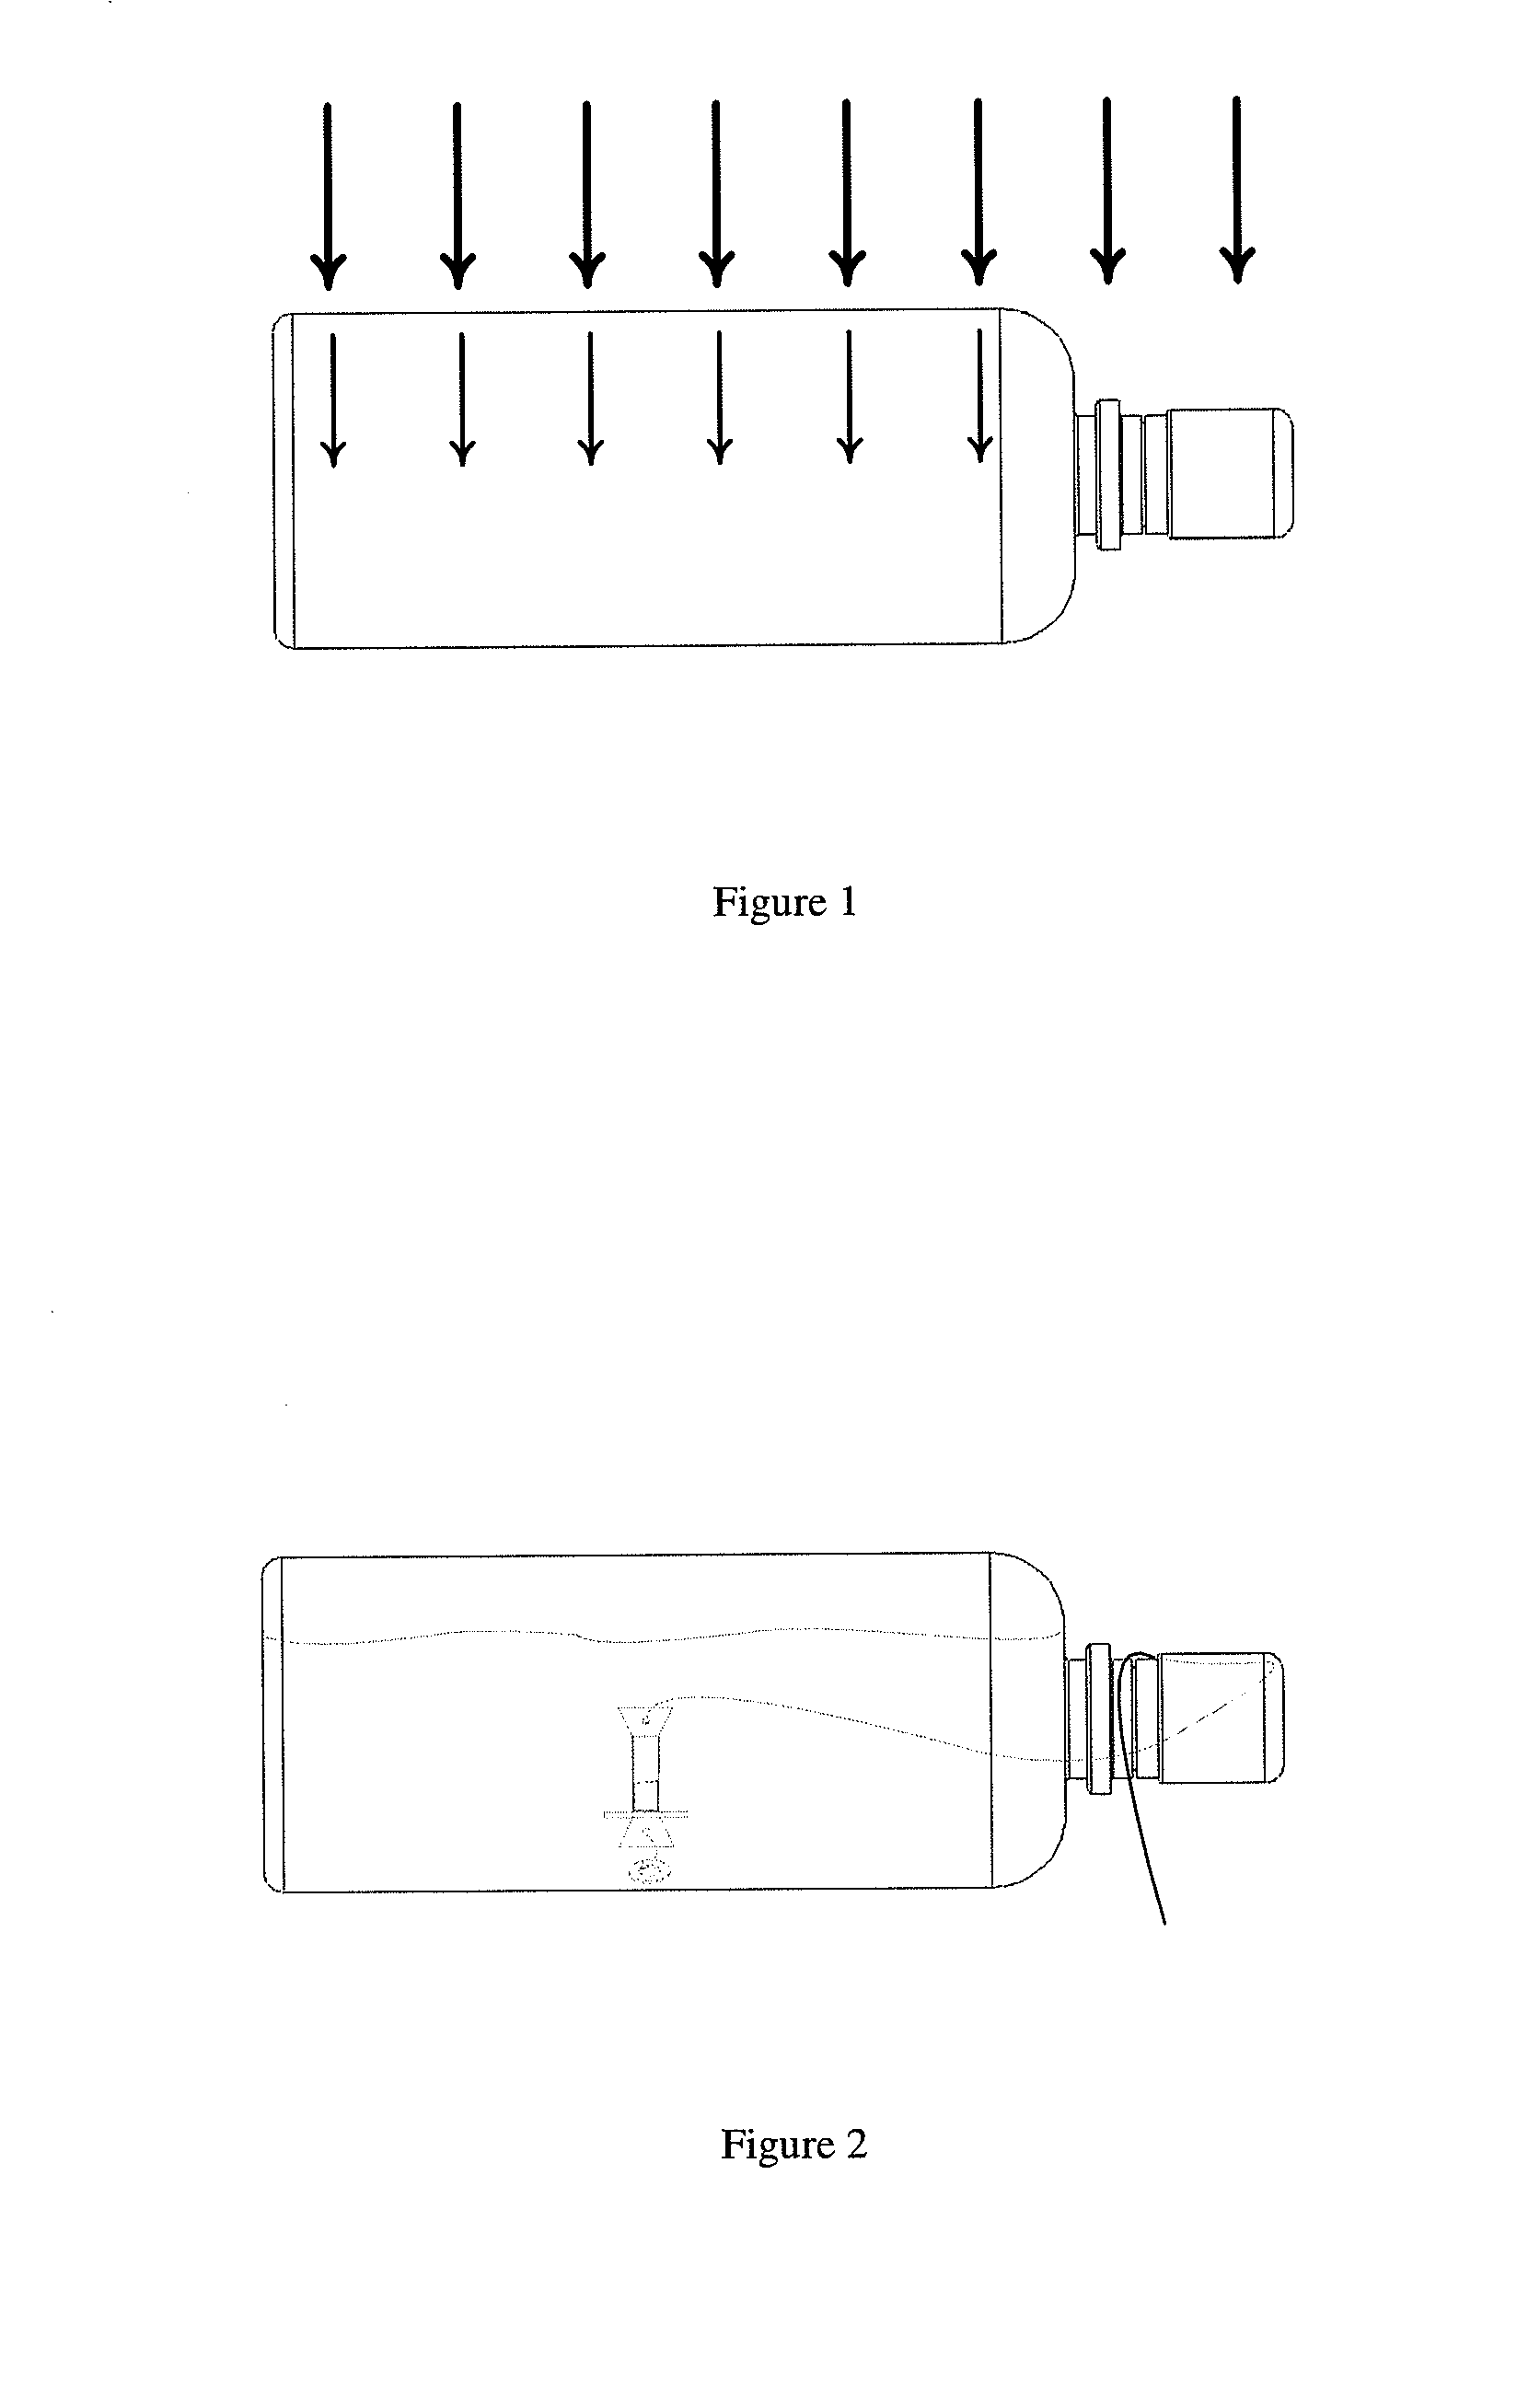 Method and apparatus for solar-based water disinfection